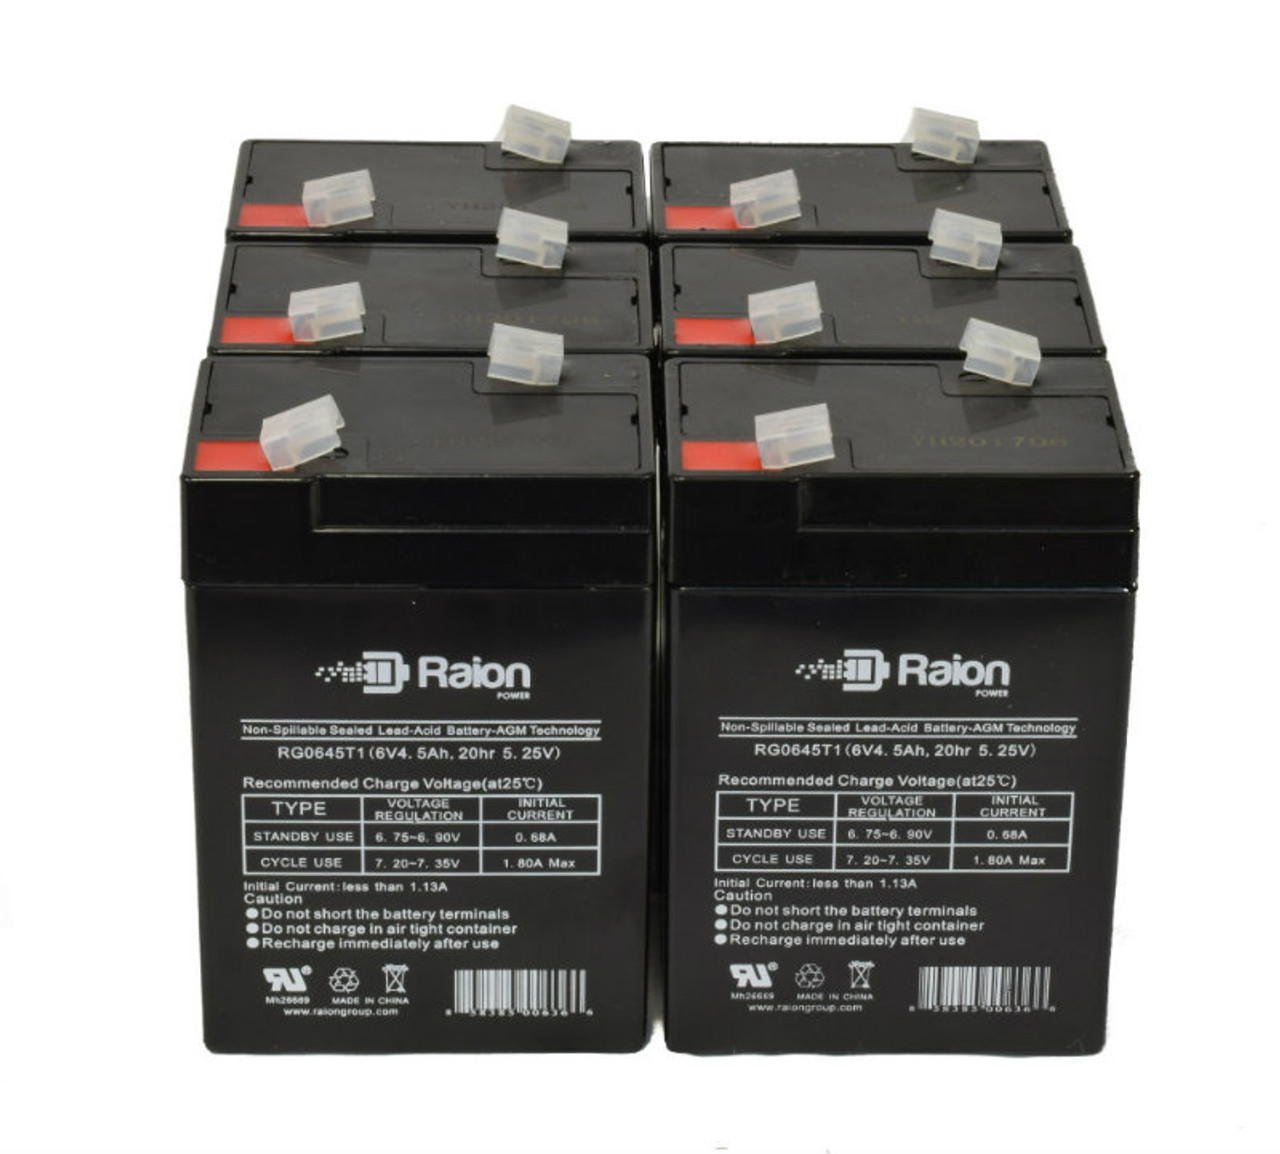 Raion Power 6V 4.5Ah Replacement Emergency Light Battery for ELS ELS EDS640W - 6 Pack